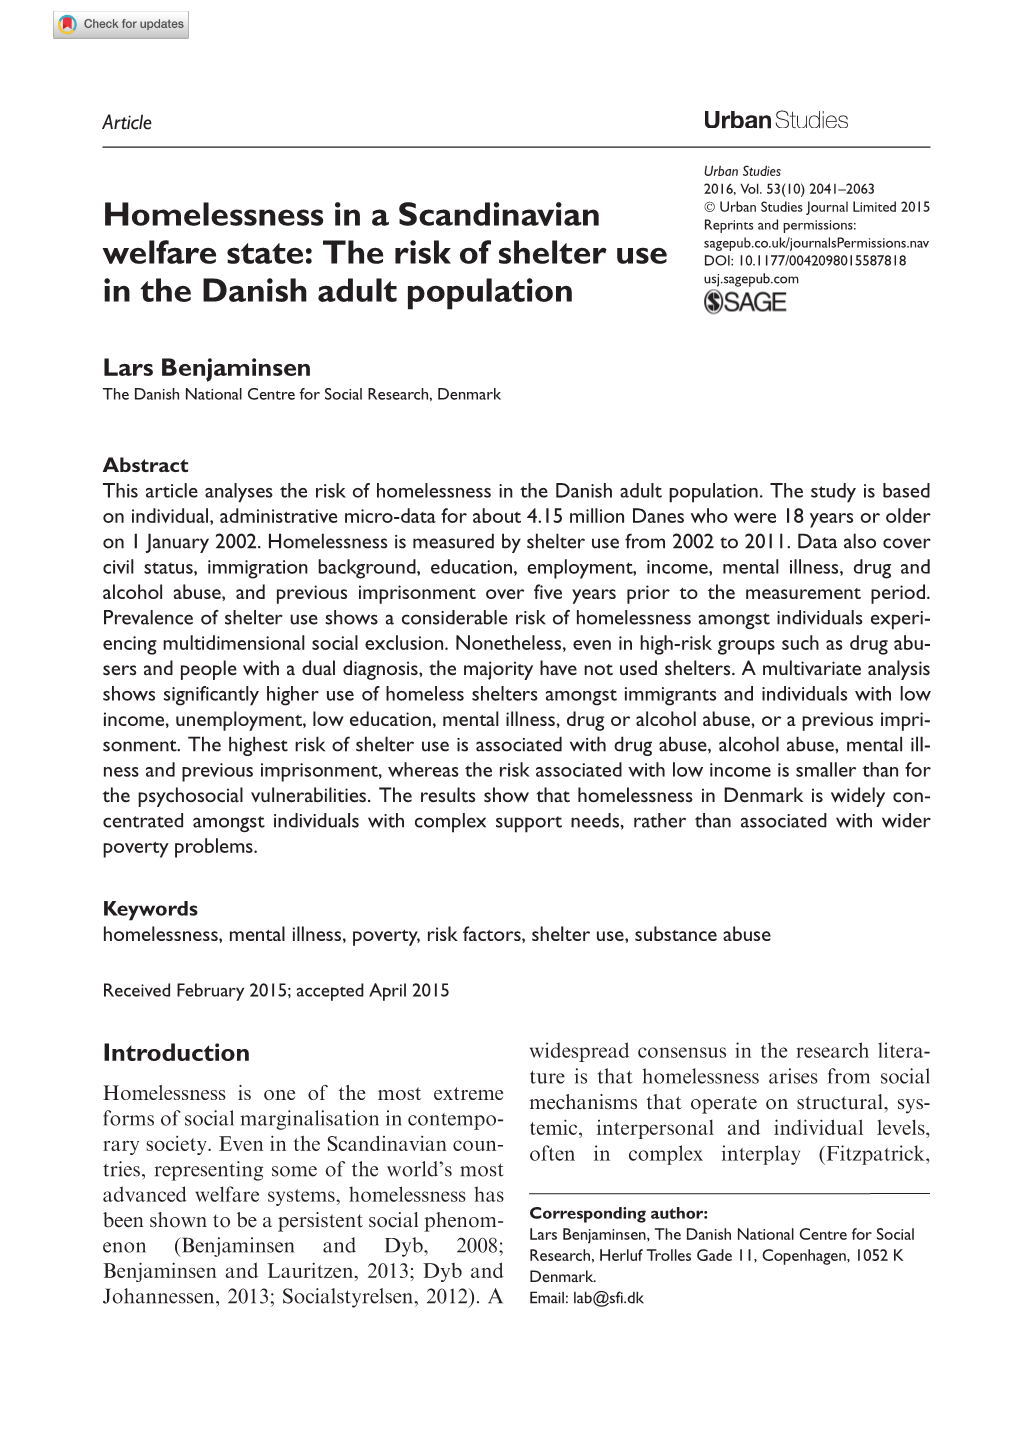 Homelessness in a Scandinavian Welfare State: the Risk of Shelter Use